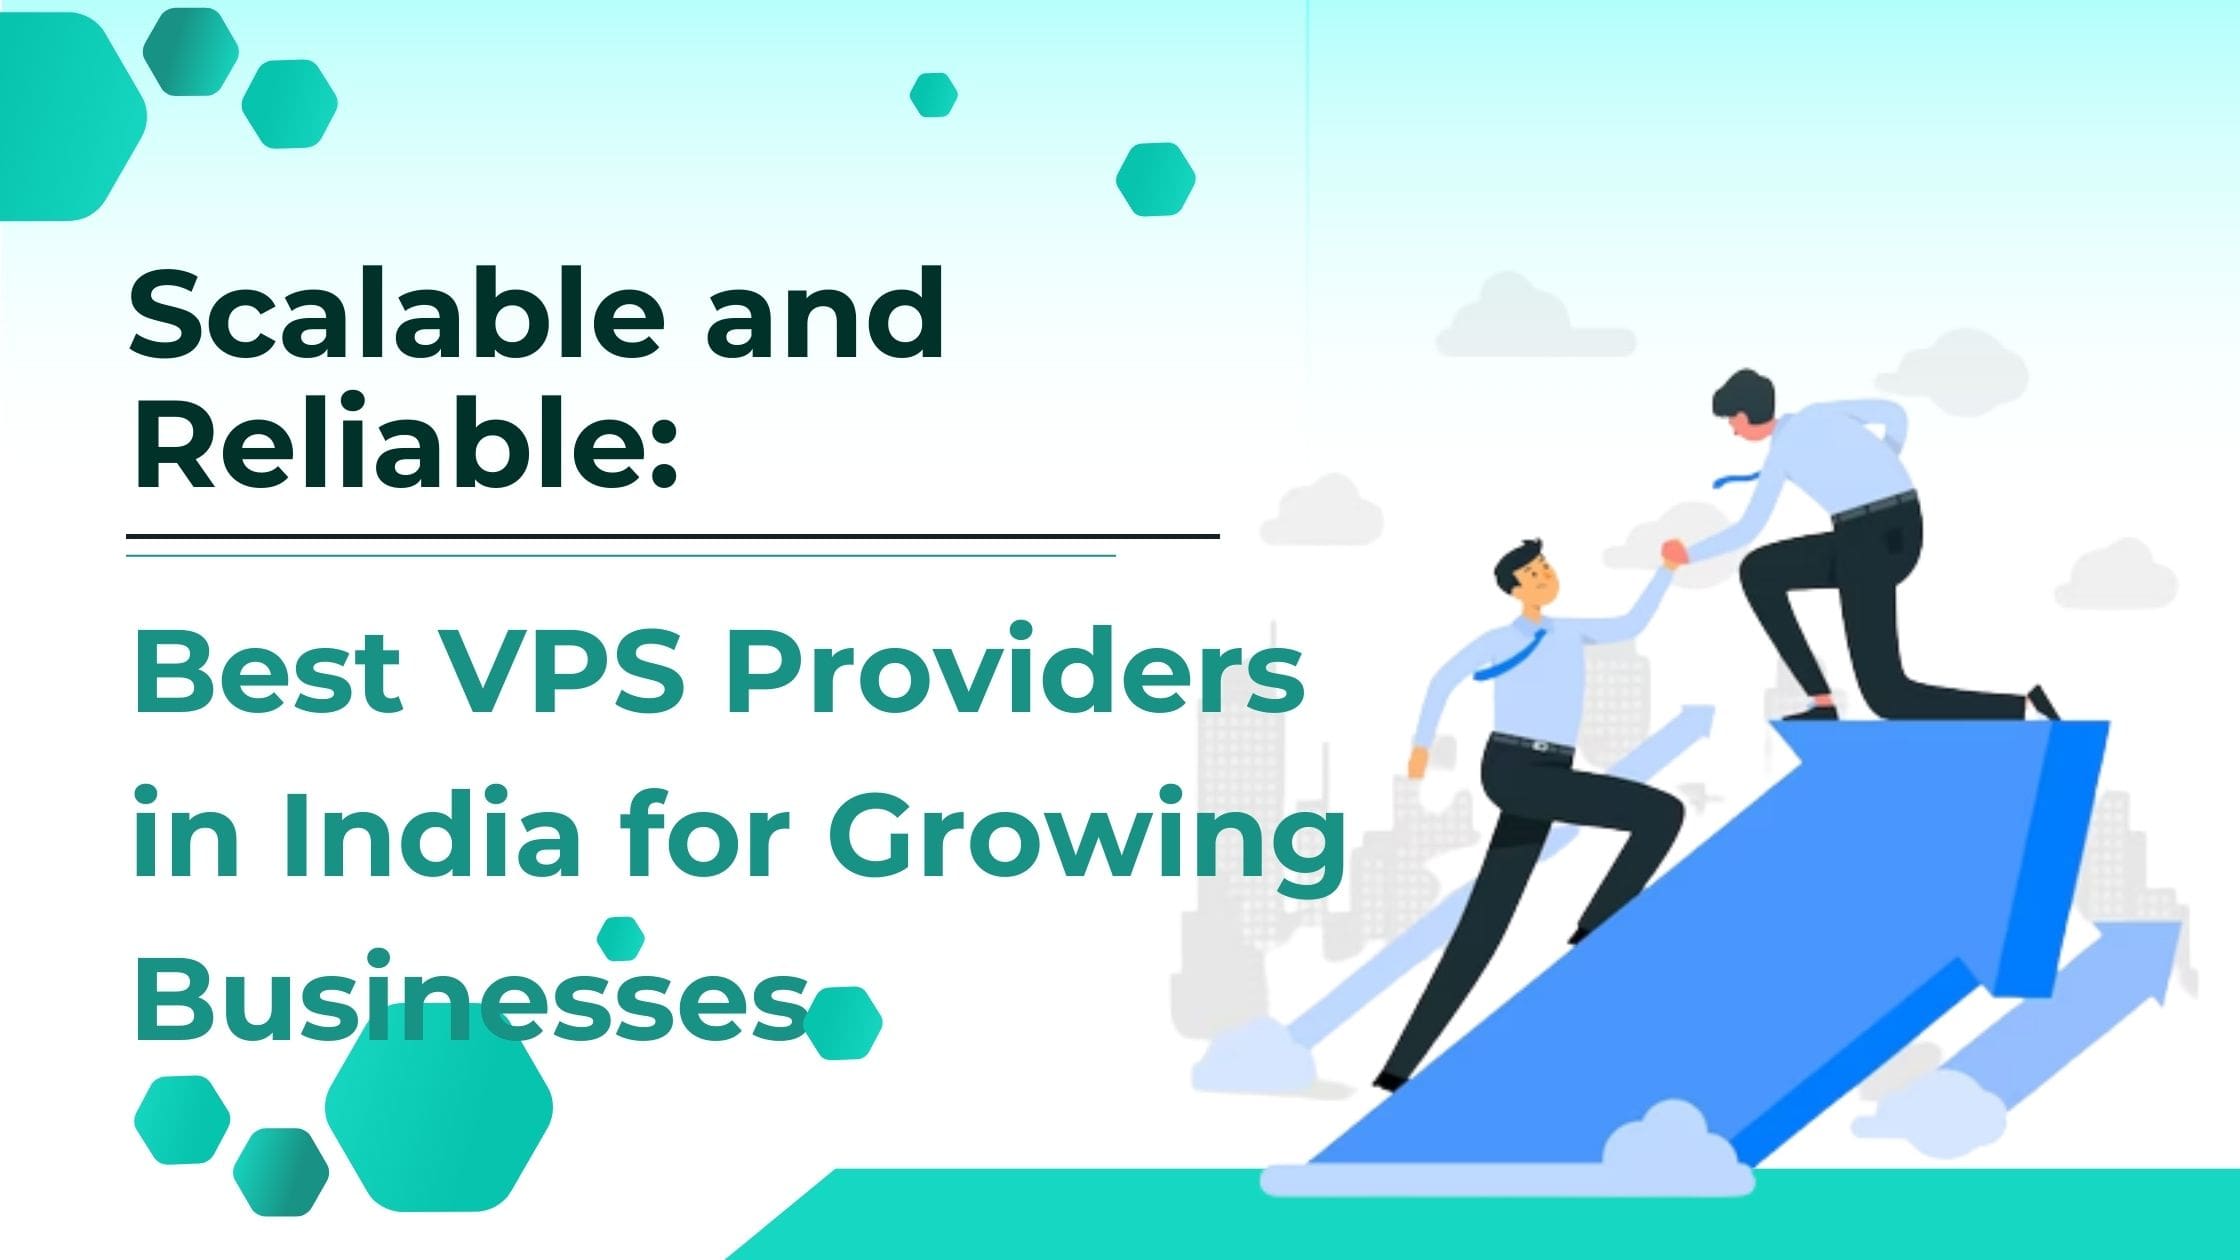 Scalable and Reliable Best VPS Providers in India for Growing Businesses